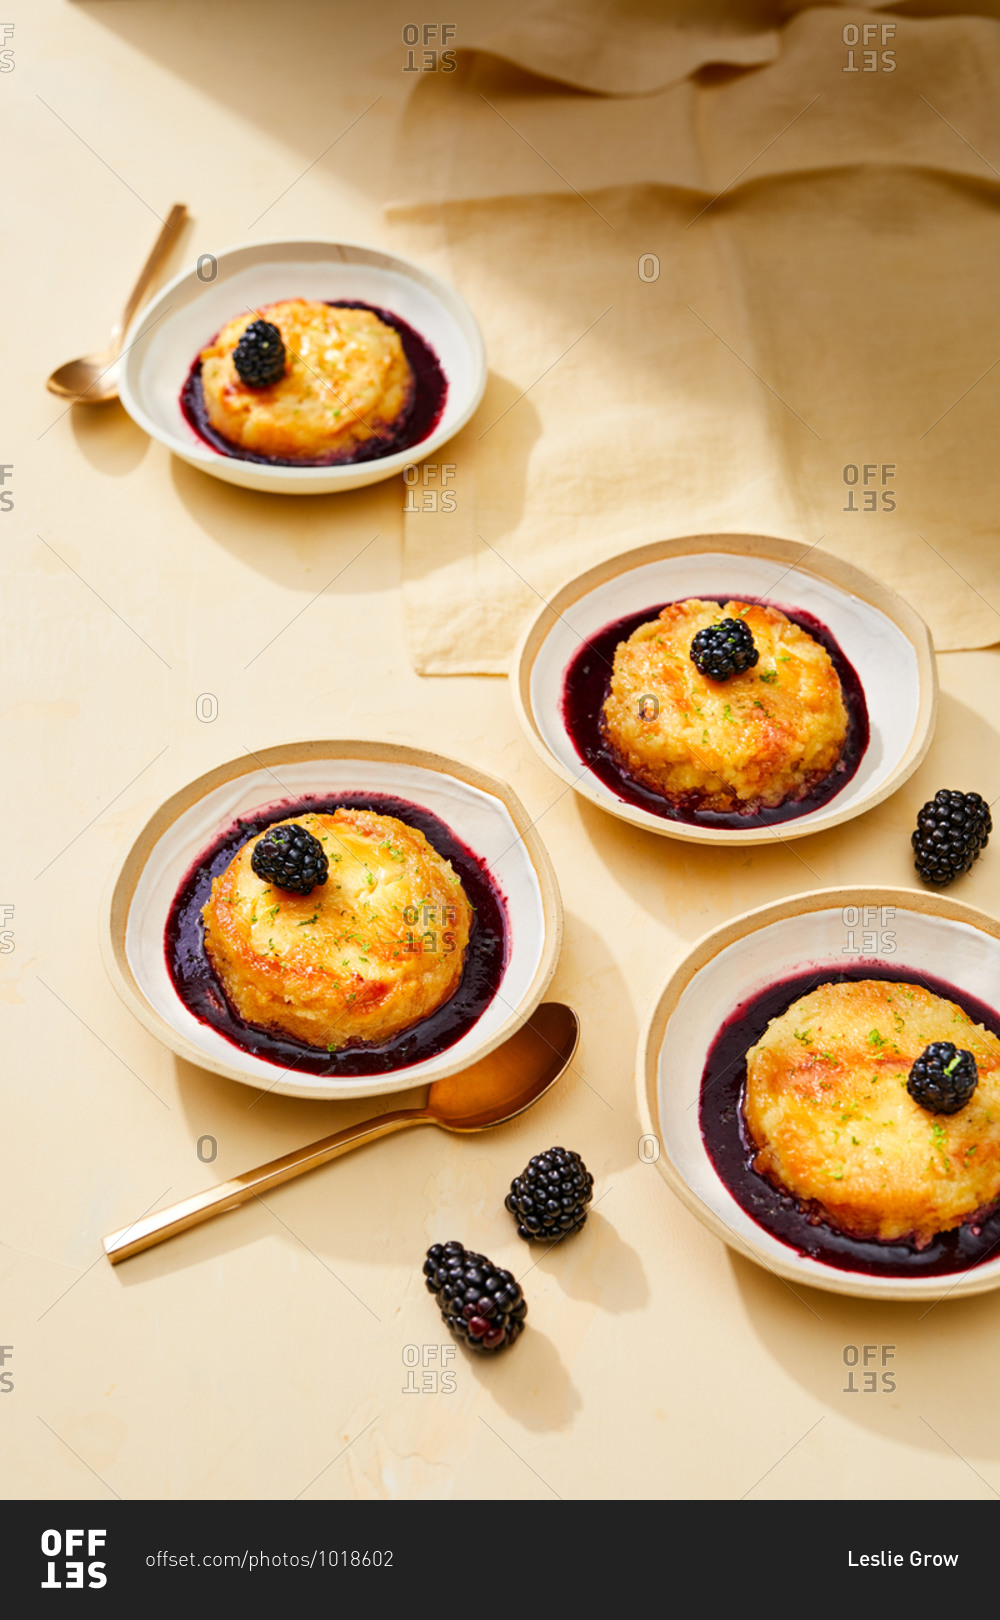 Mini custard cakes topped with blackberries